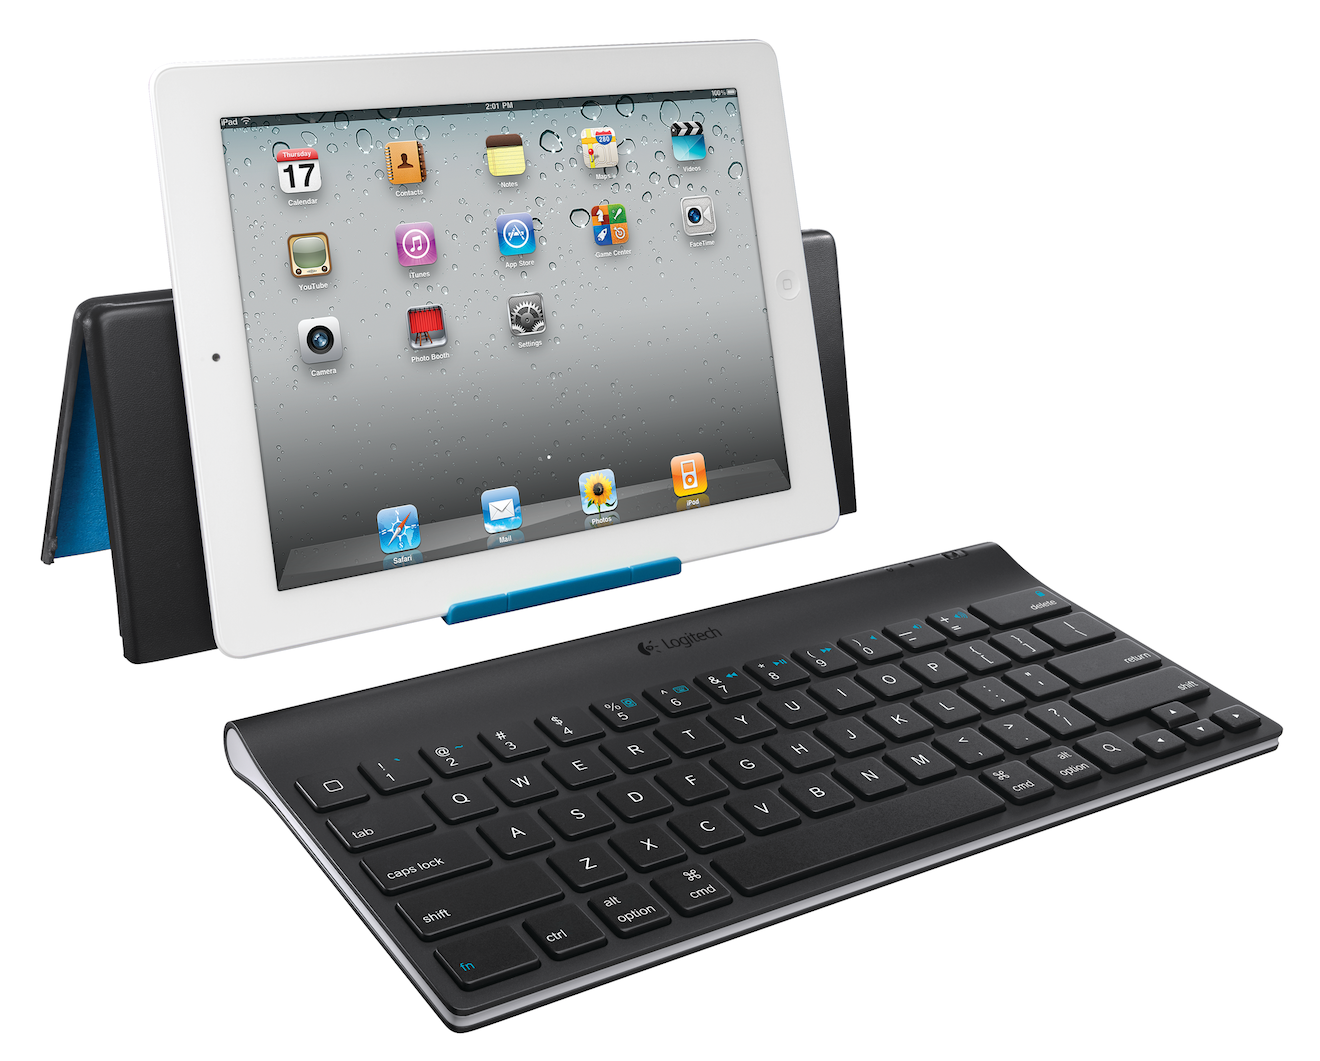 The Logitech Tablet Keyboard for iPad